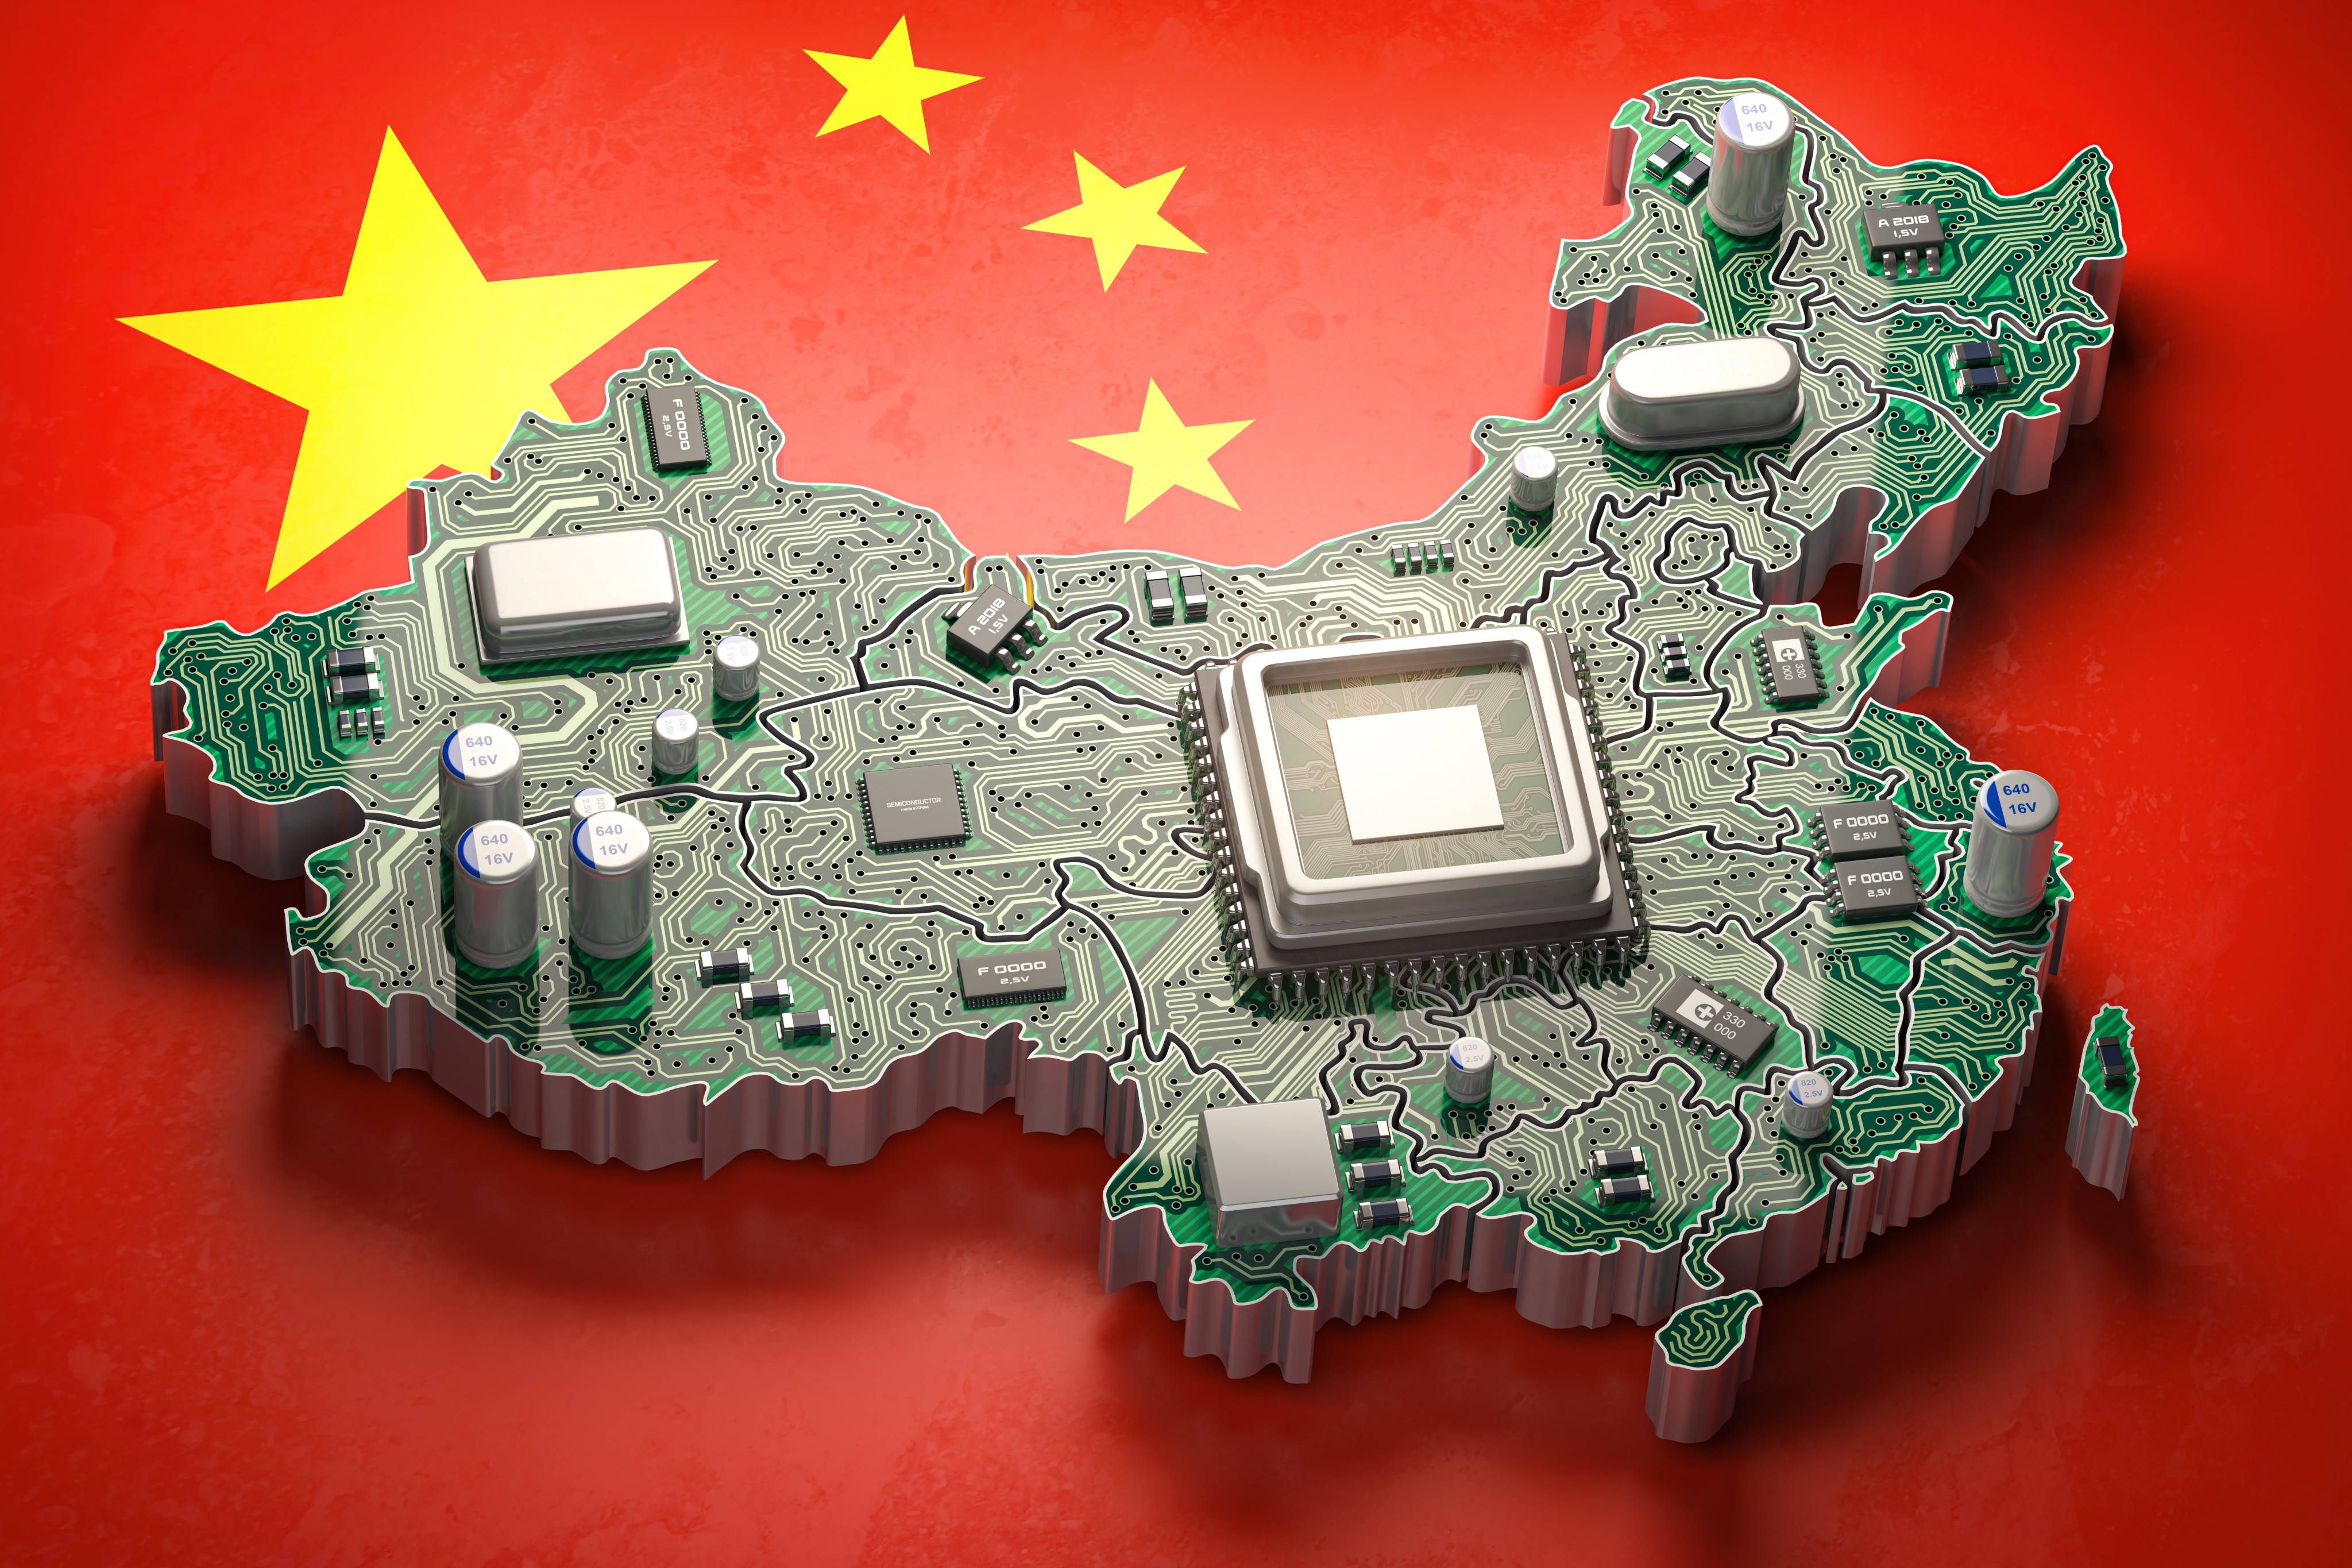 While many other nations are still stuck at the proposal stage, China has taken the lead in implementing comprehensive measures to govern AI. Photo: Shutterstock